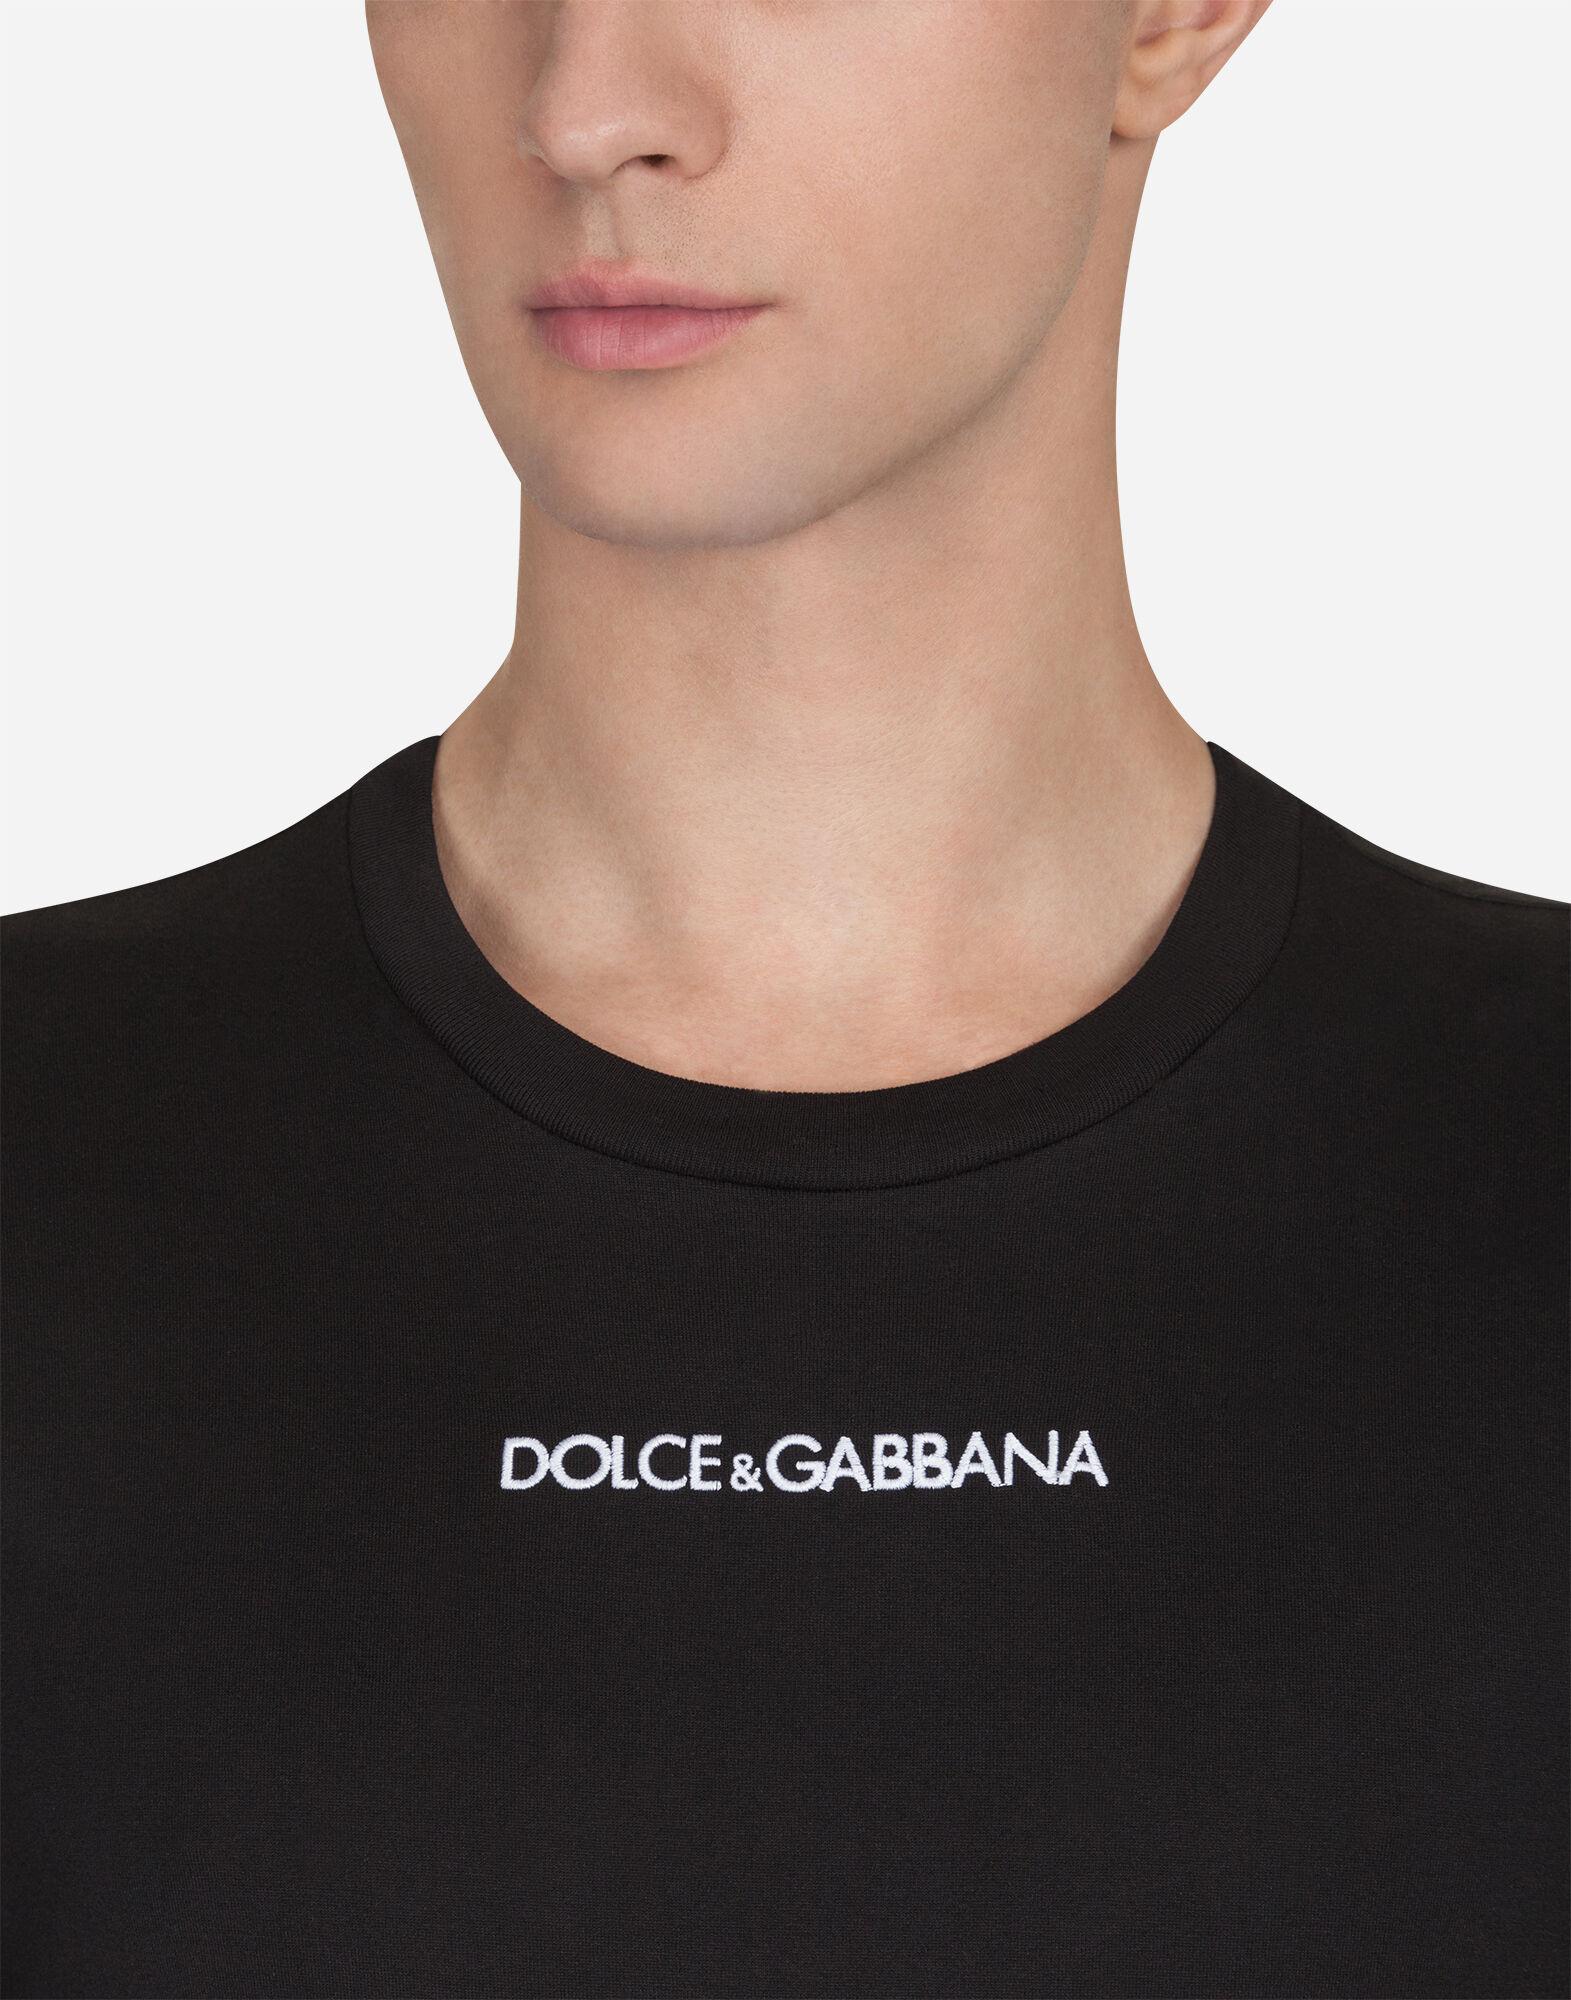 Dolce & Gabbana Cotton T-shirt With Embroidery in Black for Men - Lyst